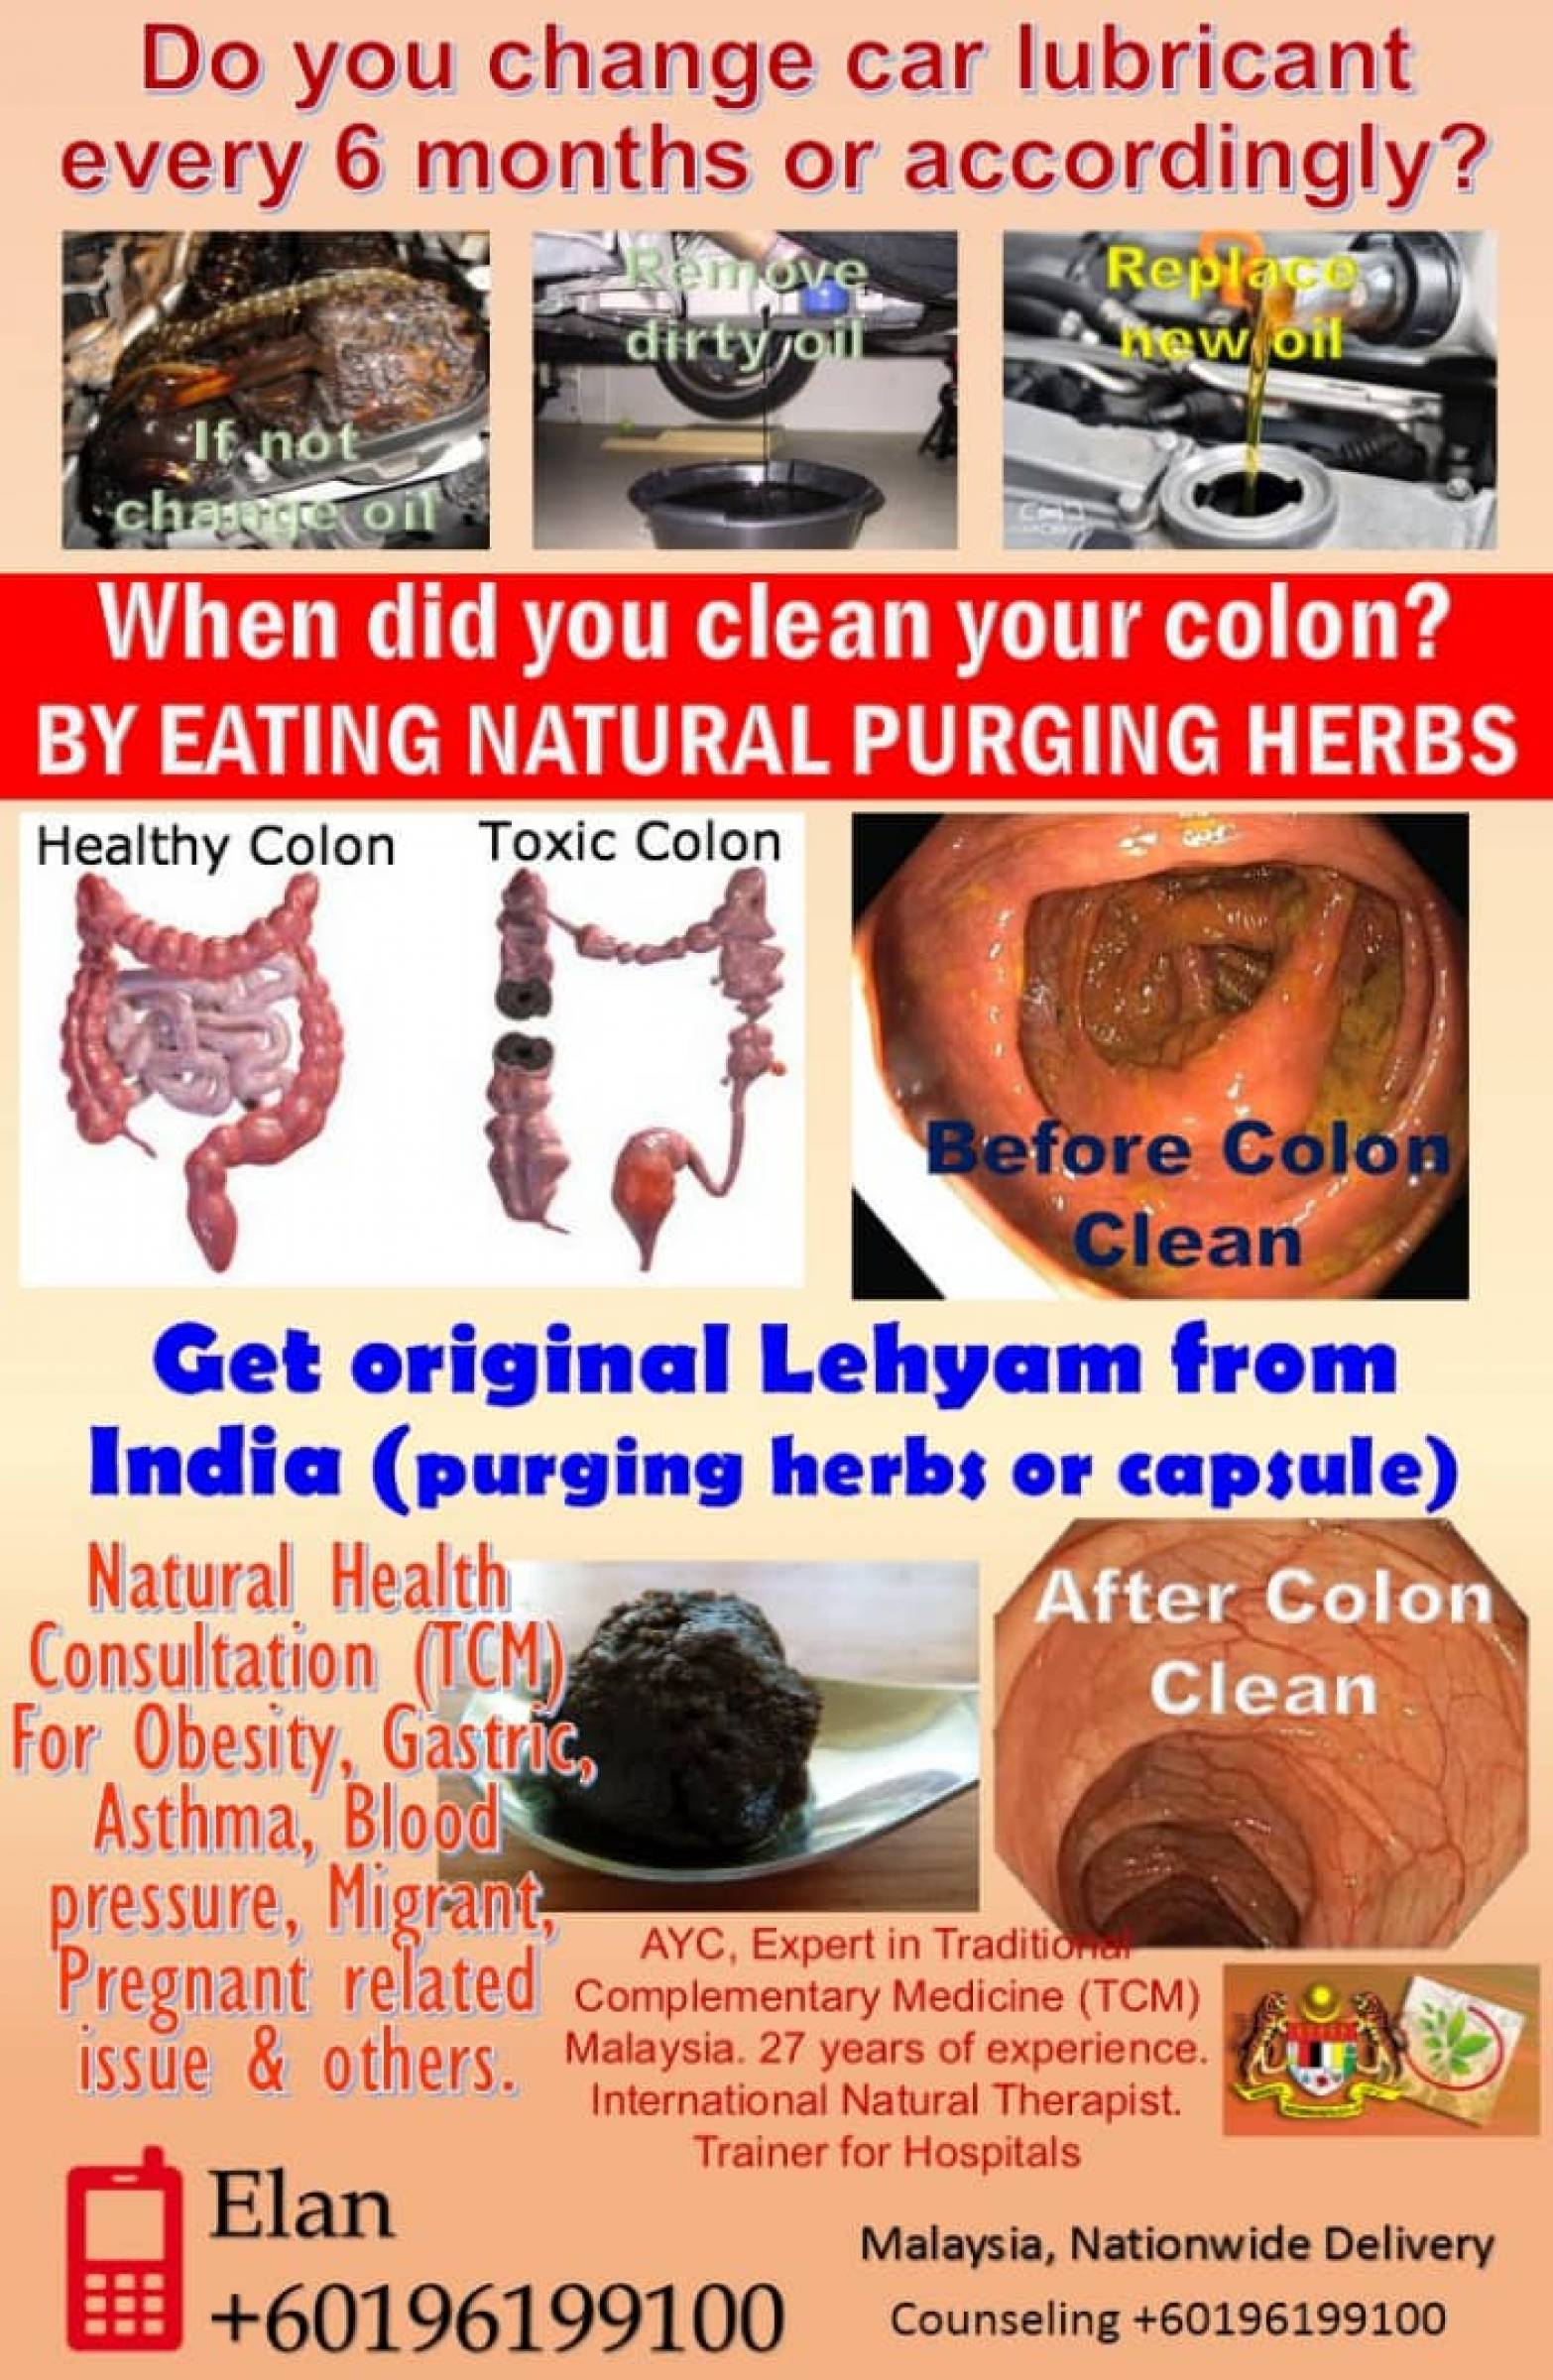 Natural Purging Herbs from India